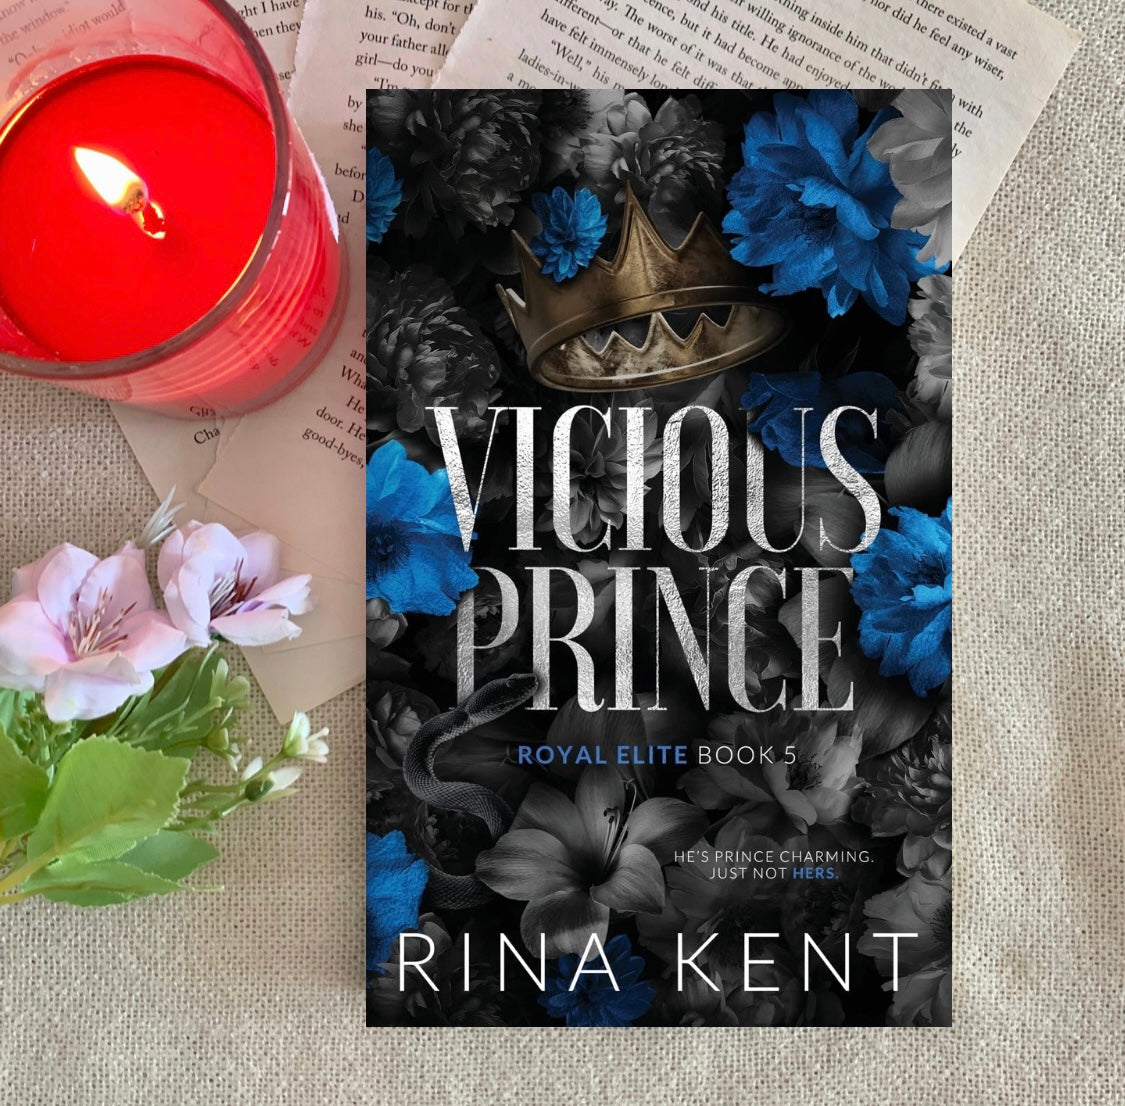 Royal Elite Series (Special Editions) by Rina Kent